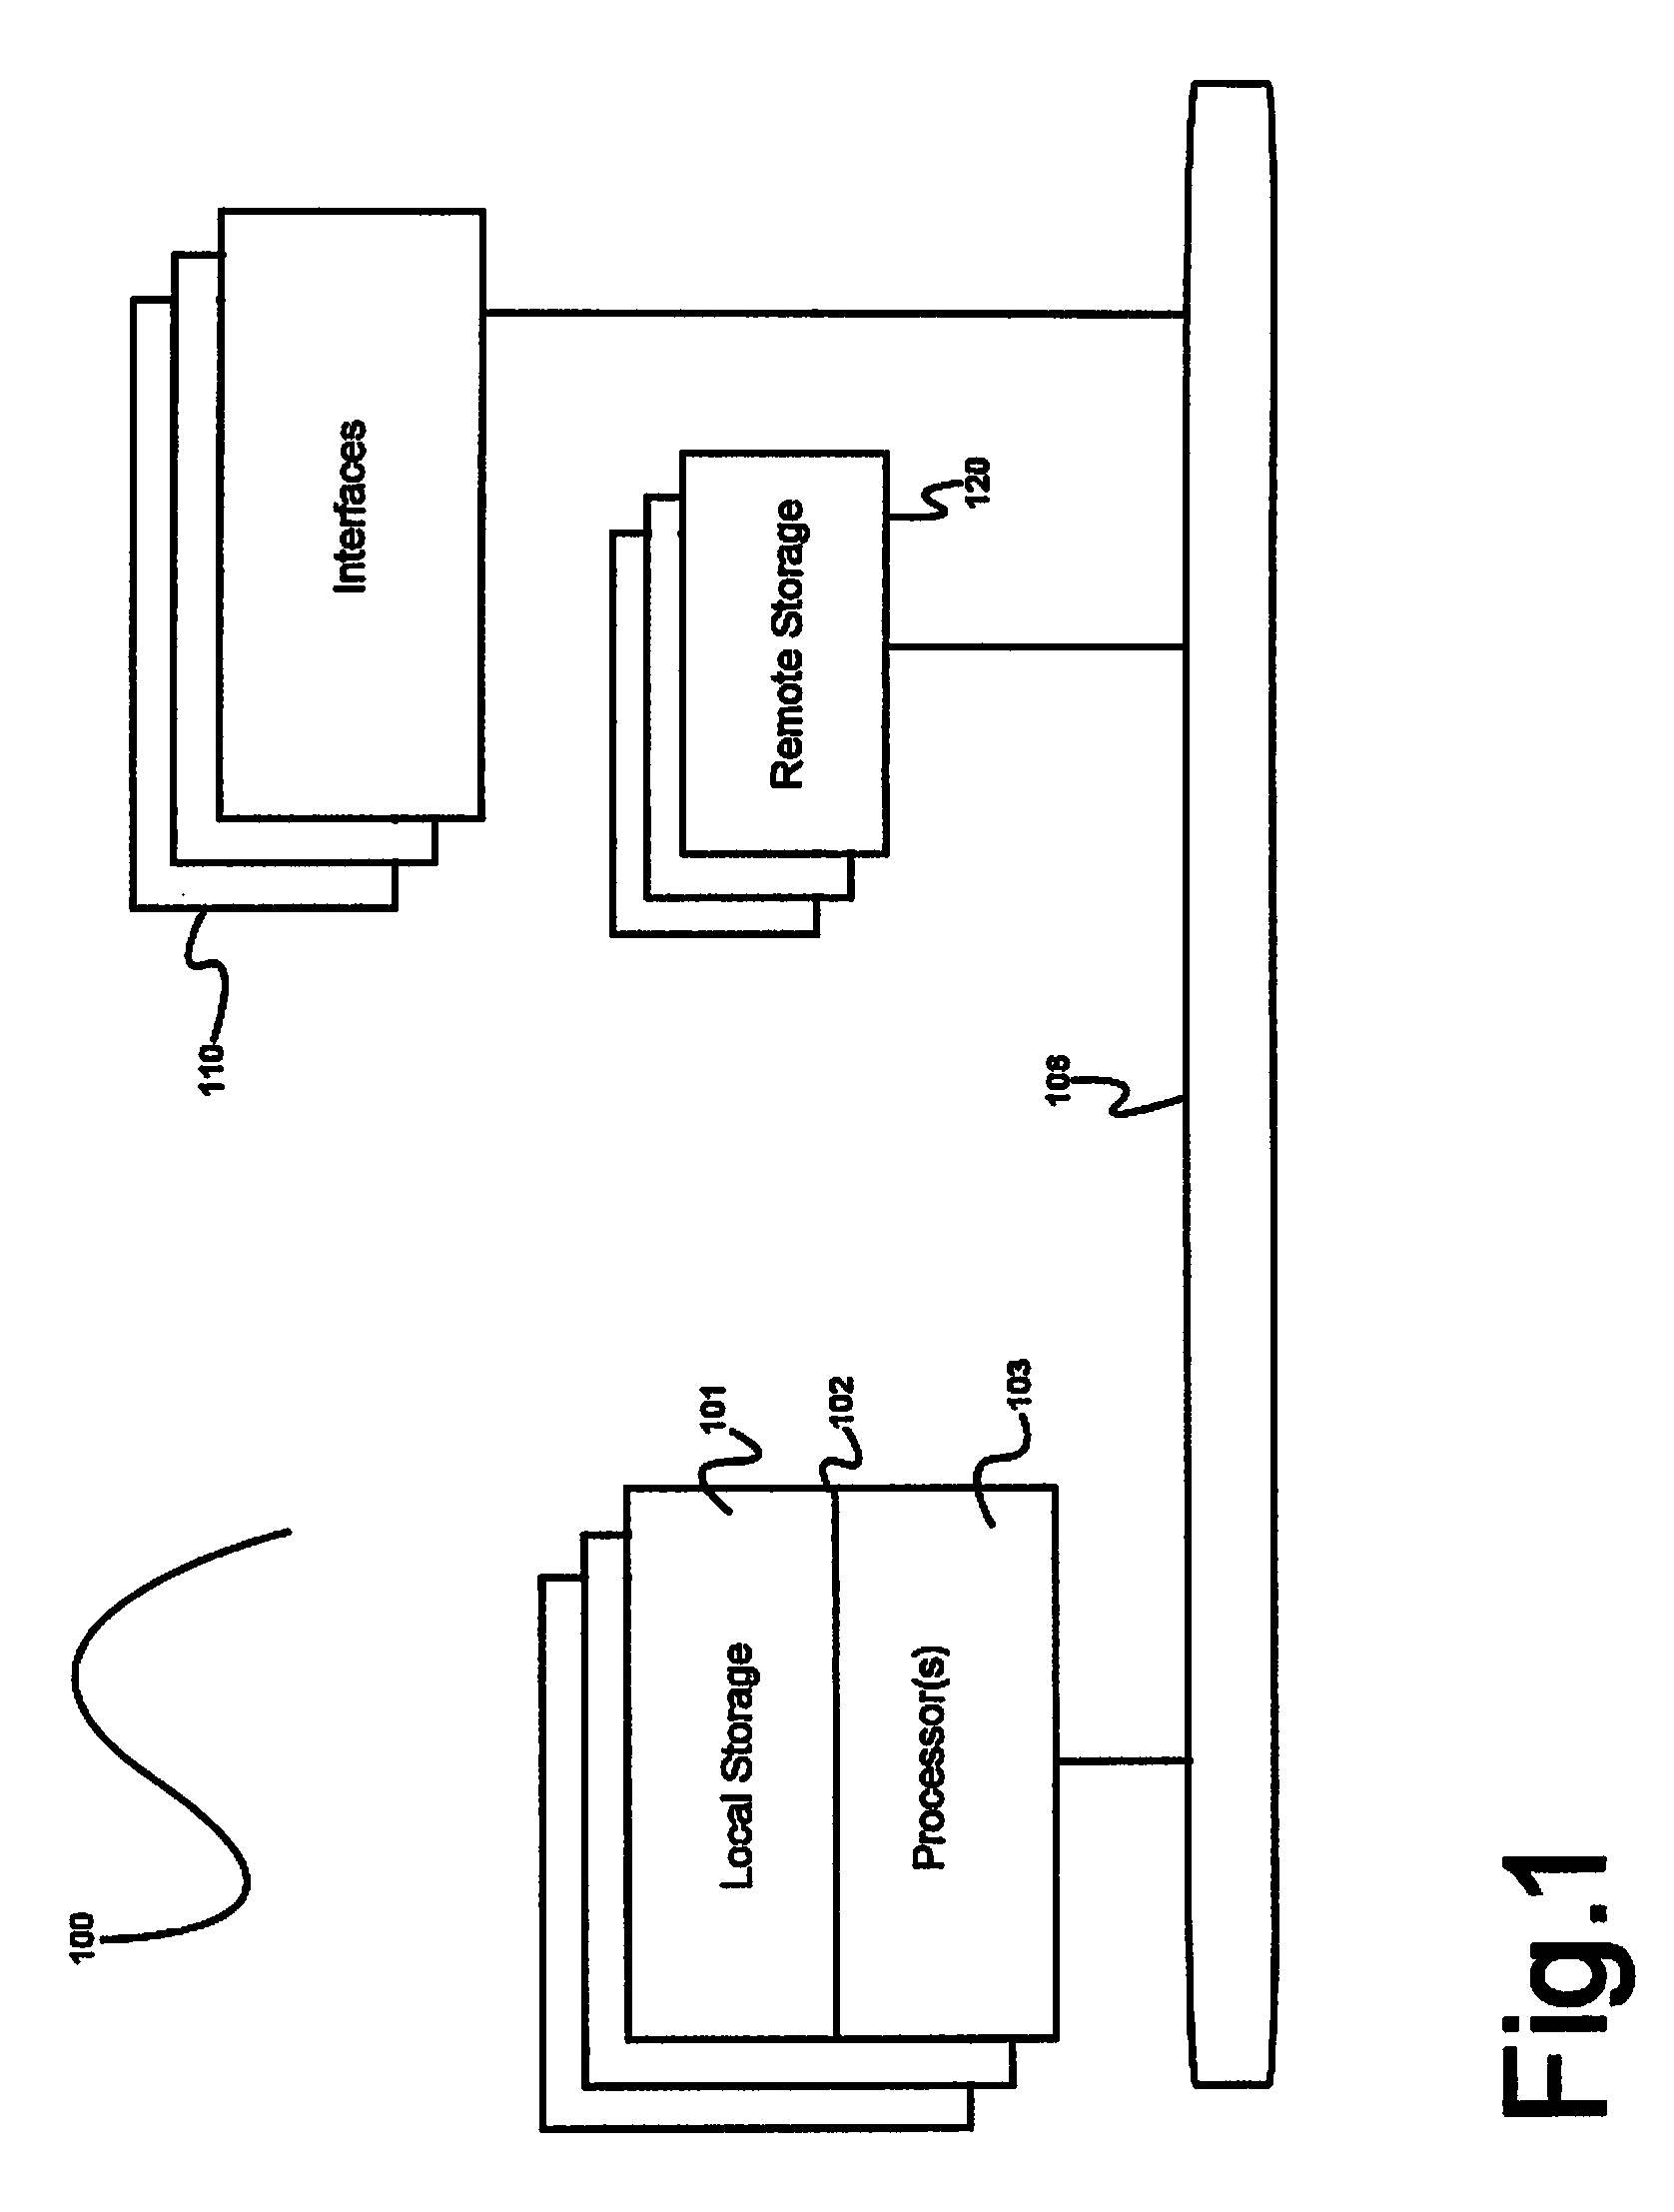 System and method for speaker recognition on mobile devices